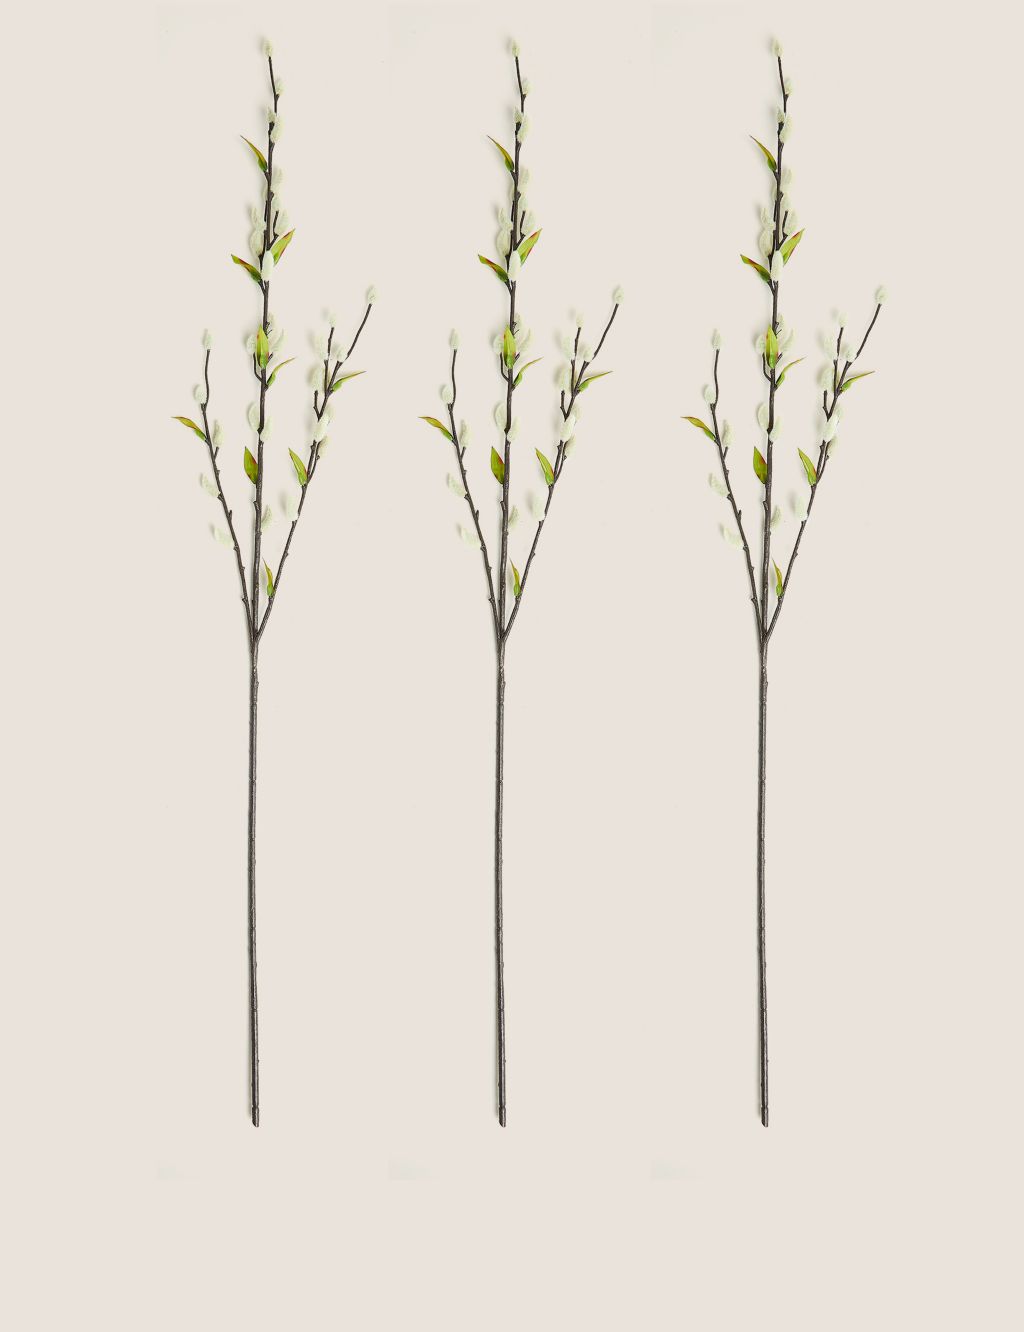 Set of 3 Artificial Willow Single Stems